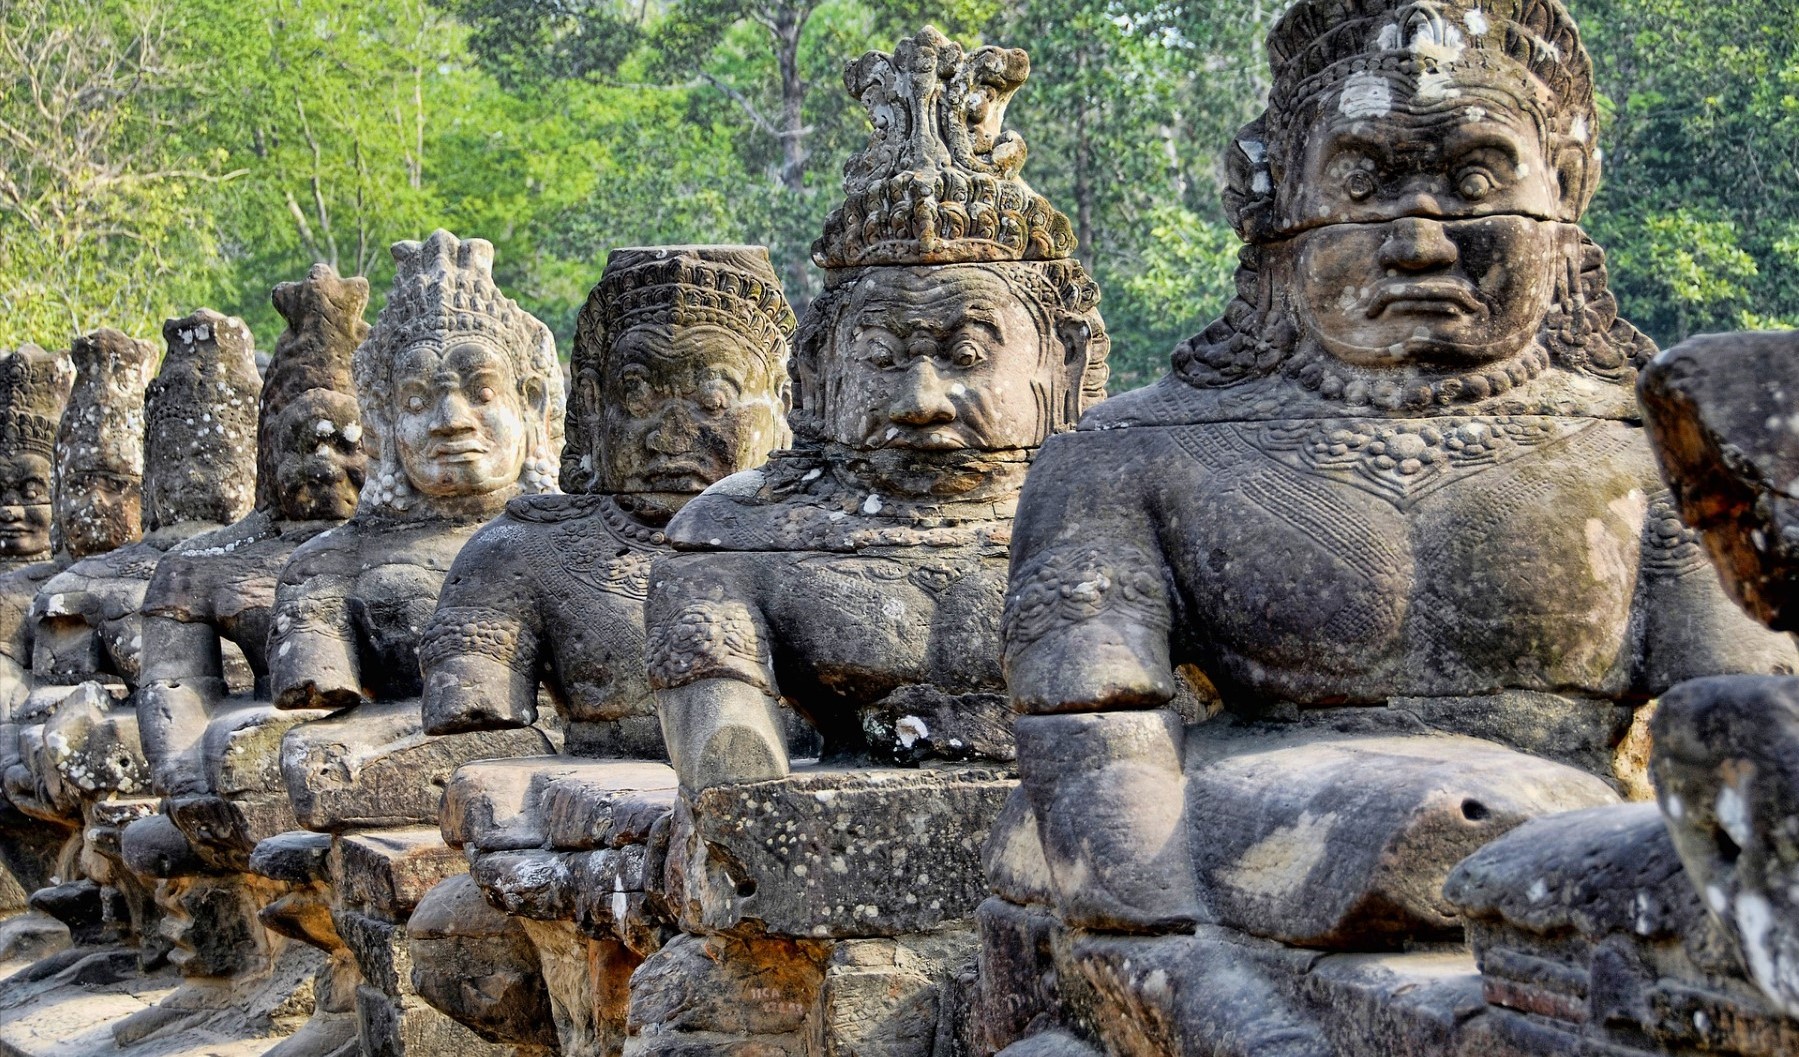 The 10 Best Things to Do in Siem Reap (Other Than Angkor Wat!)